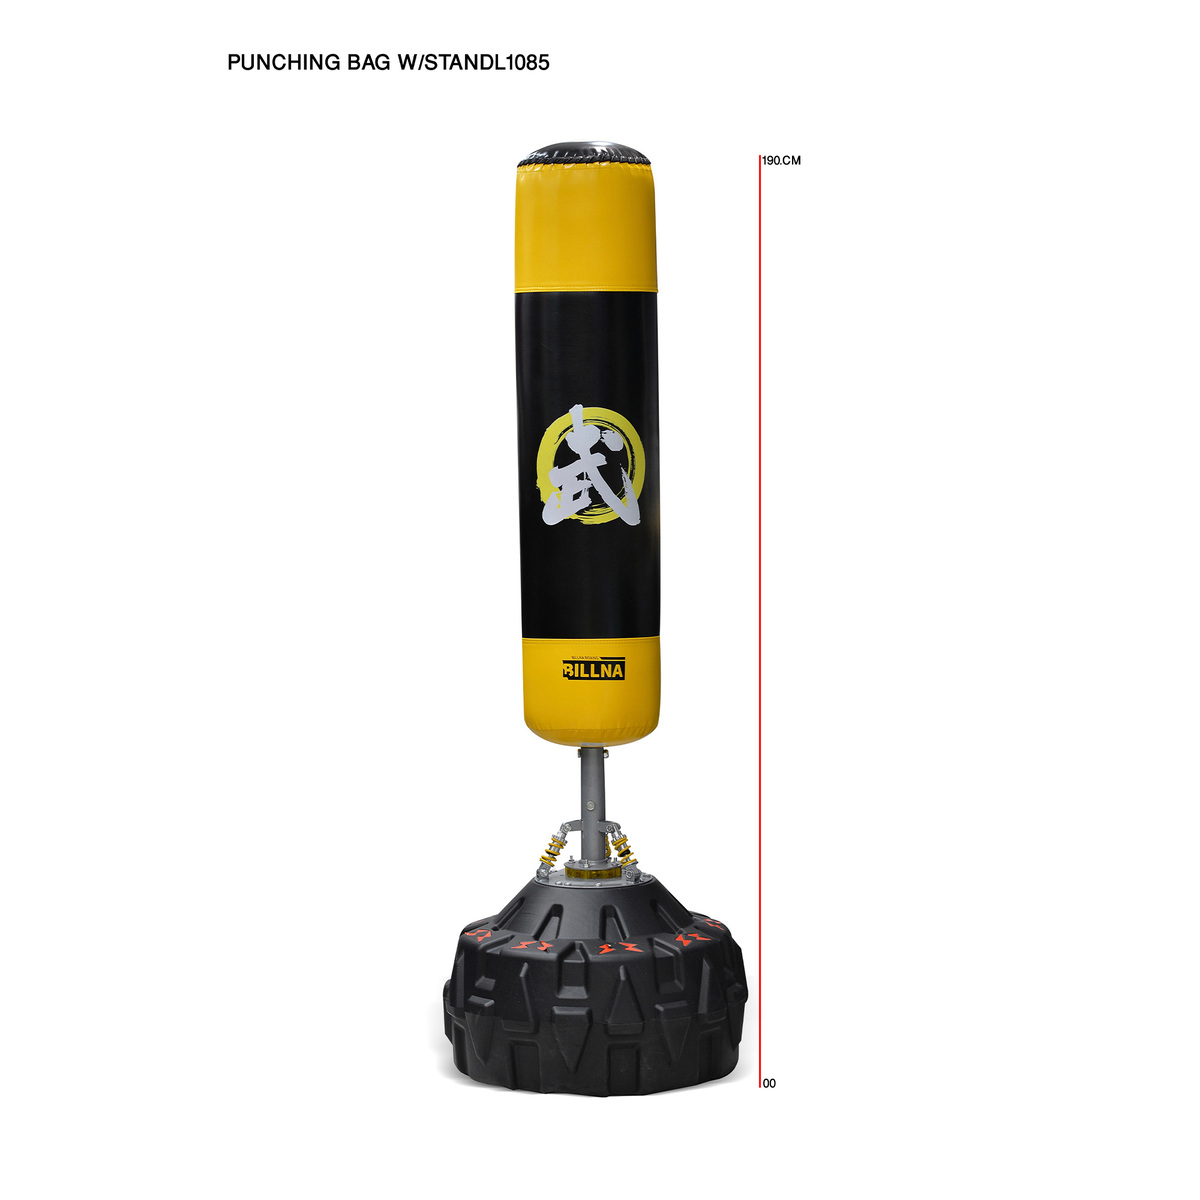 Oriente Punching Bag with Stand, Black/Yellow, L1085